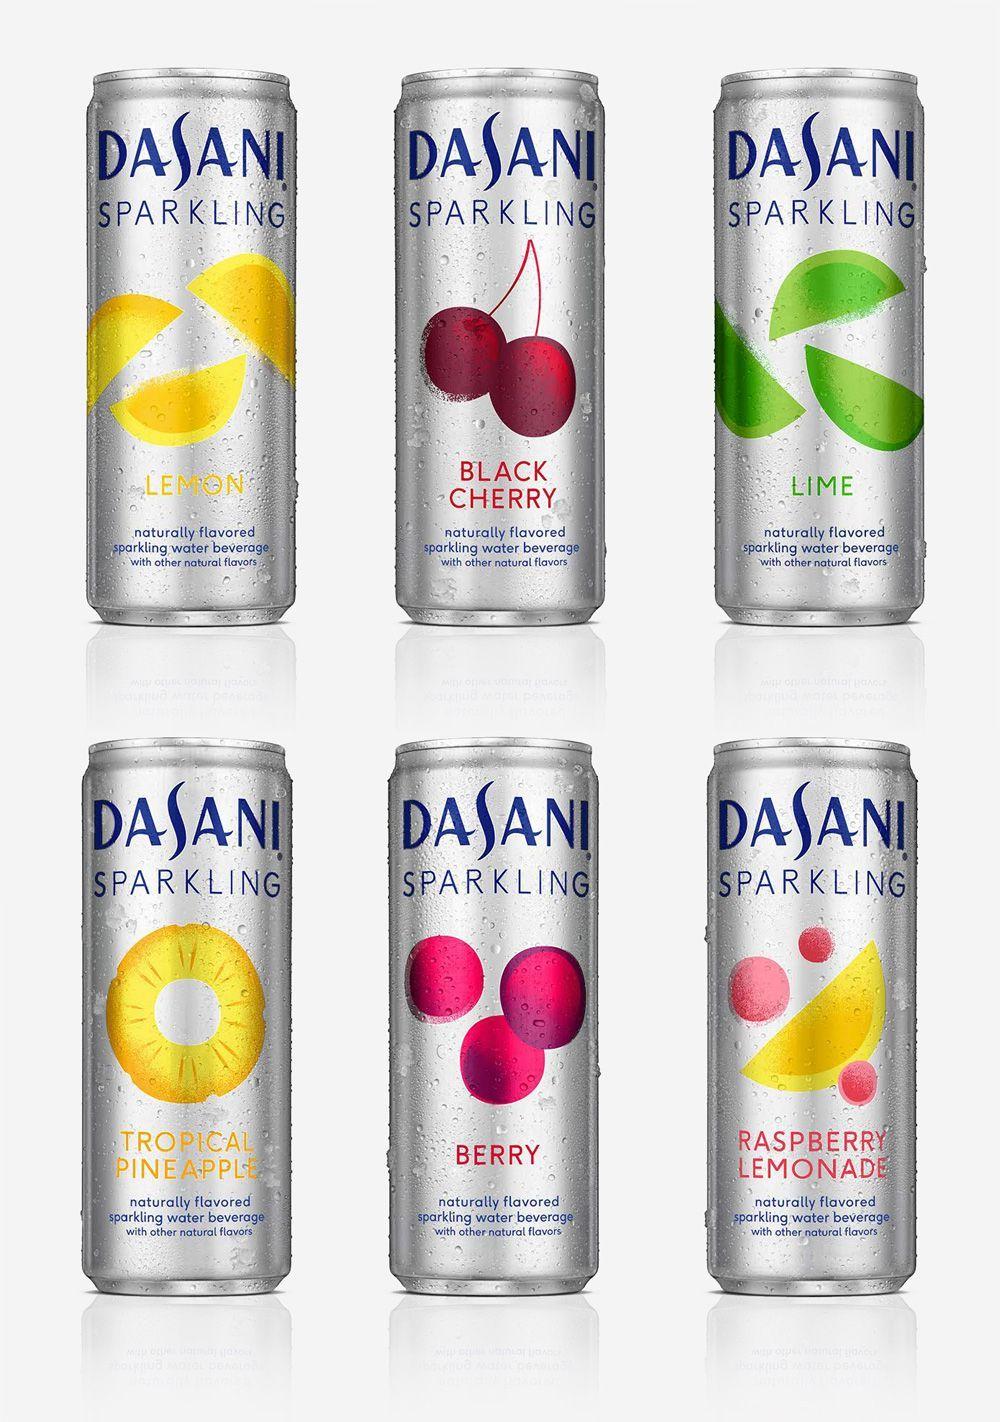 Dasani Logo - New Logo and Packaging for Dasani Sparkling by Moniker | Brand New ...